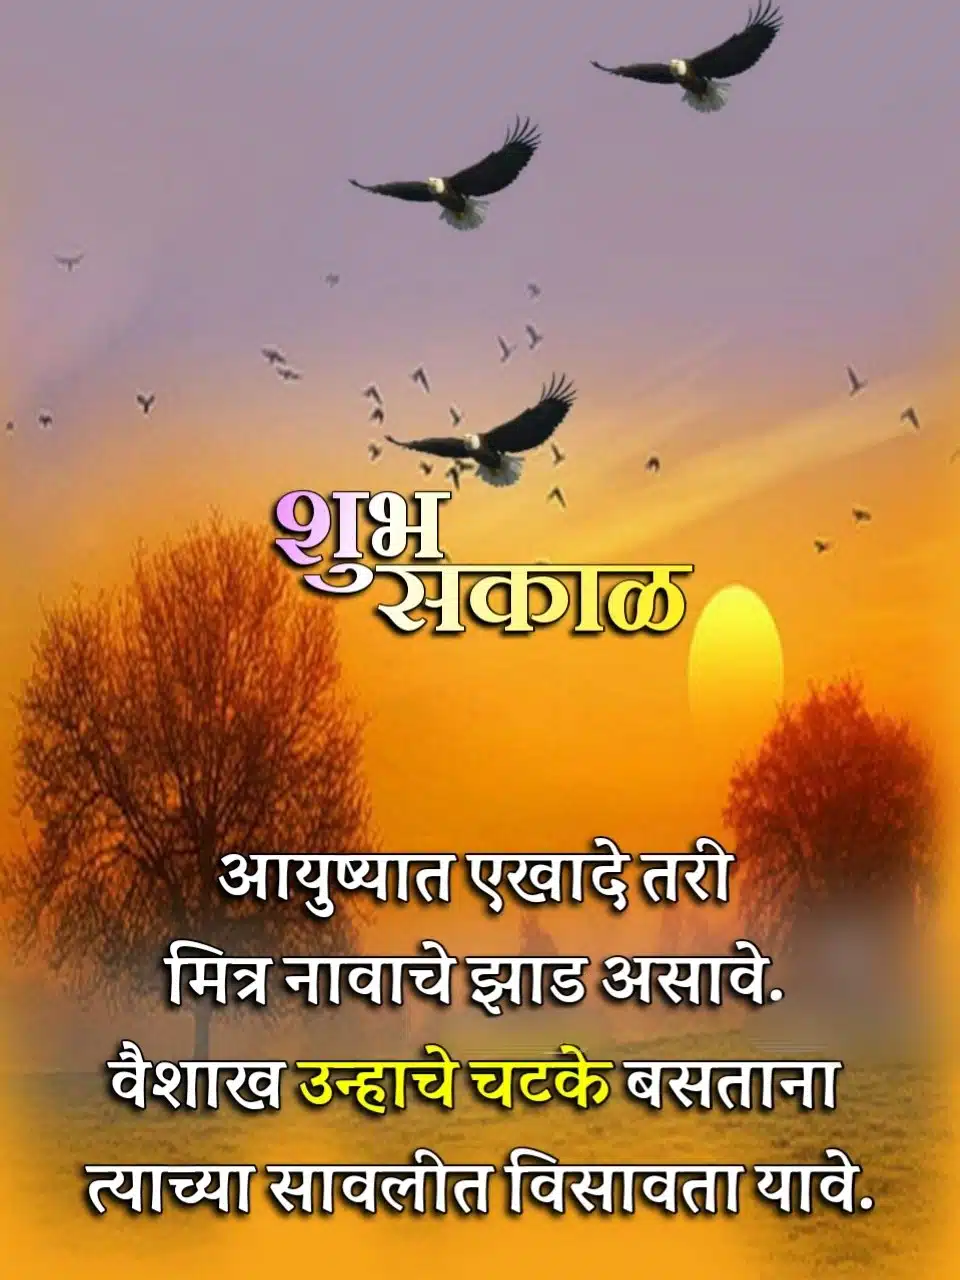 Good Morning Images In Marathi For Friends, Friendship Good Morning Quotes Marathi